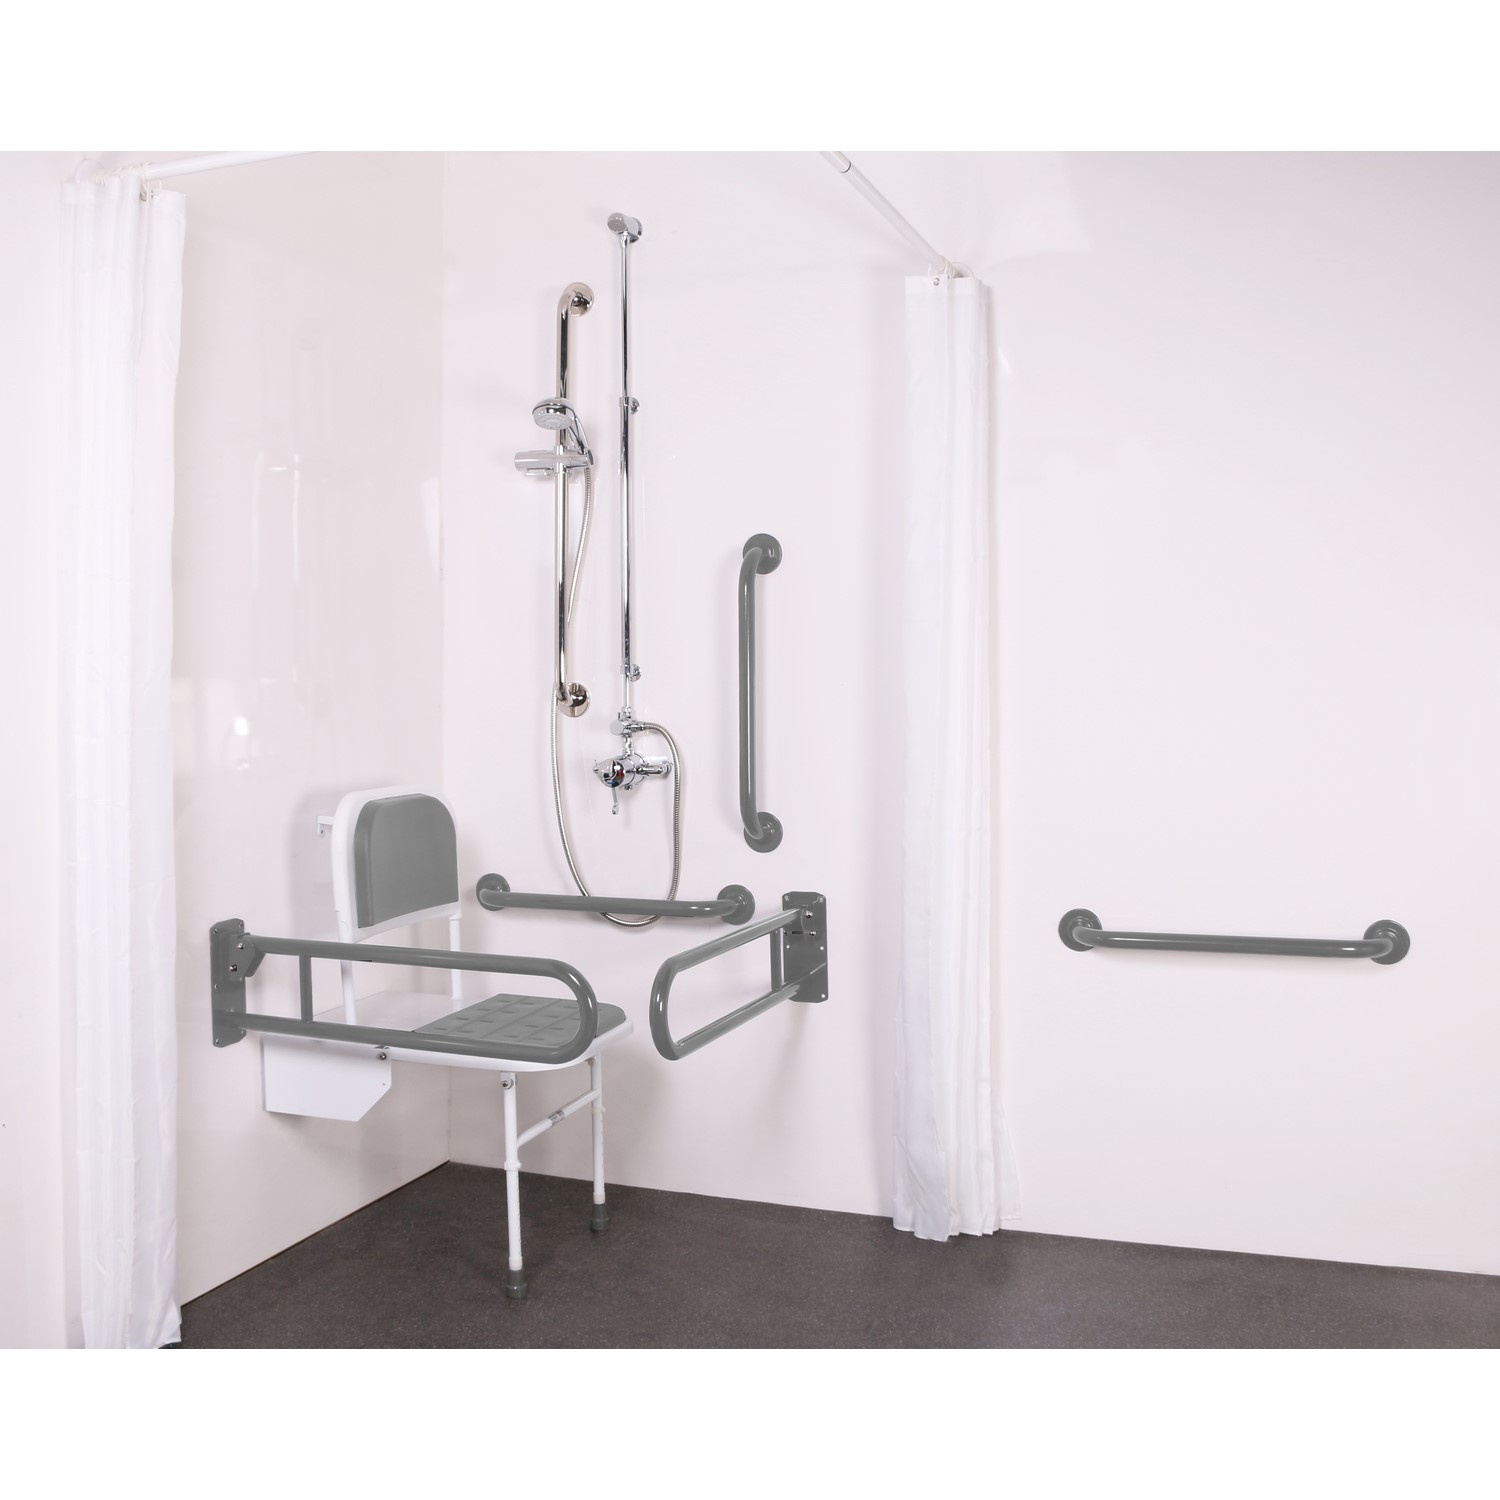 Exposed valve Doc M shower pack stainless steel concealed fixings grey